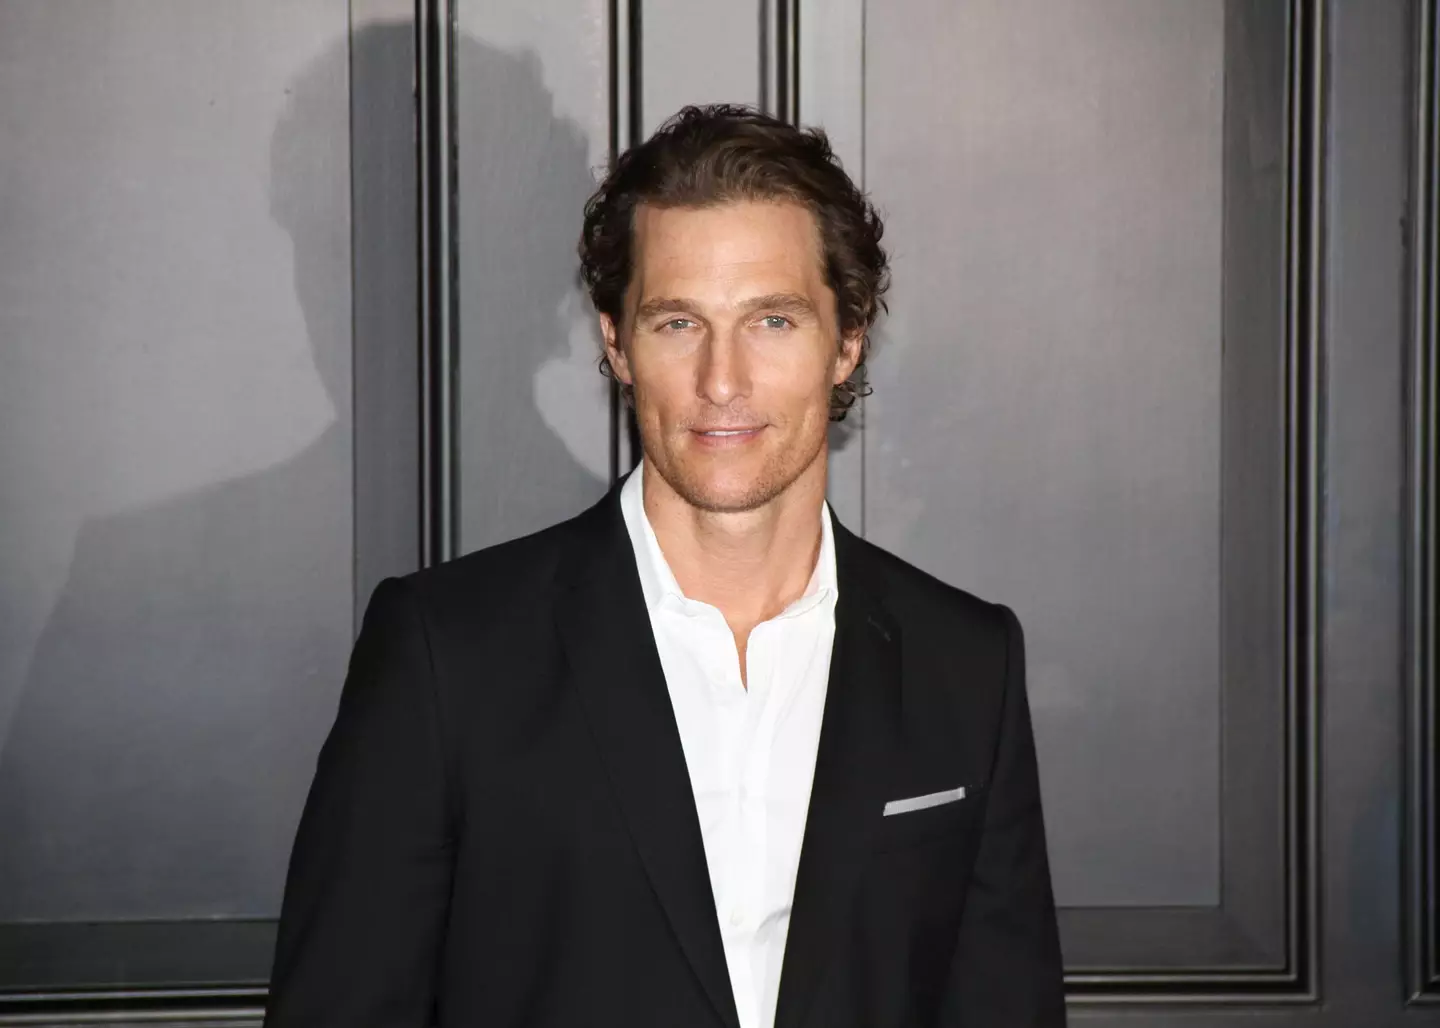 McConaughey had bizarre interaction with a fortune teller.